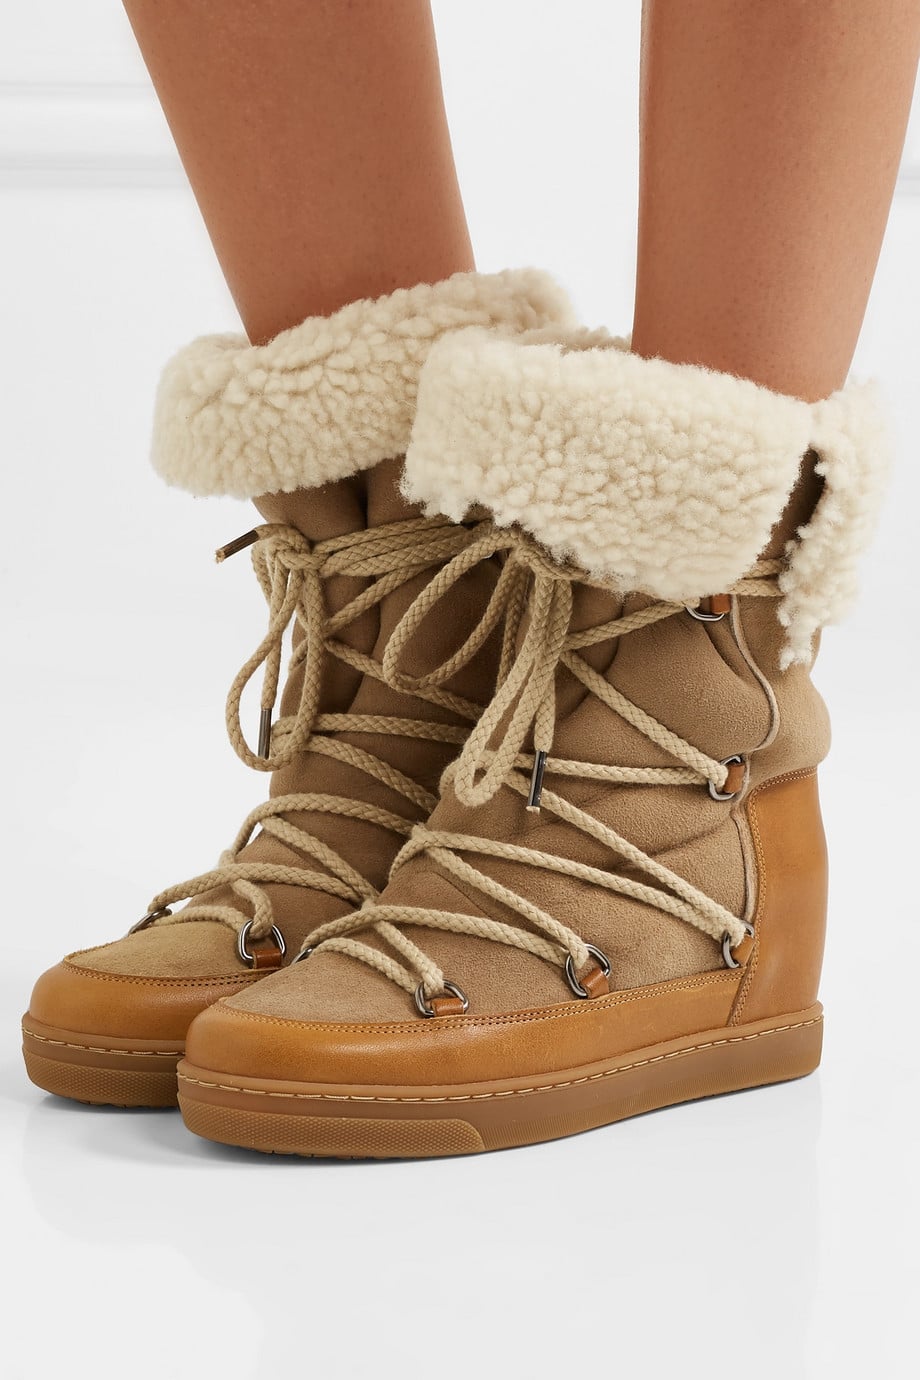 Isabel Marant Nowly Shearling-Lined Snow Boots | If You Catch Me in UGG Boots All Winter, It's Because Rihanna Is Making Them Again | POPSUGAR Fashion Photo 7